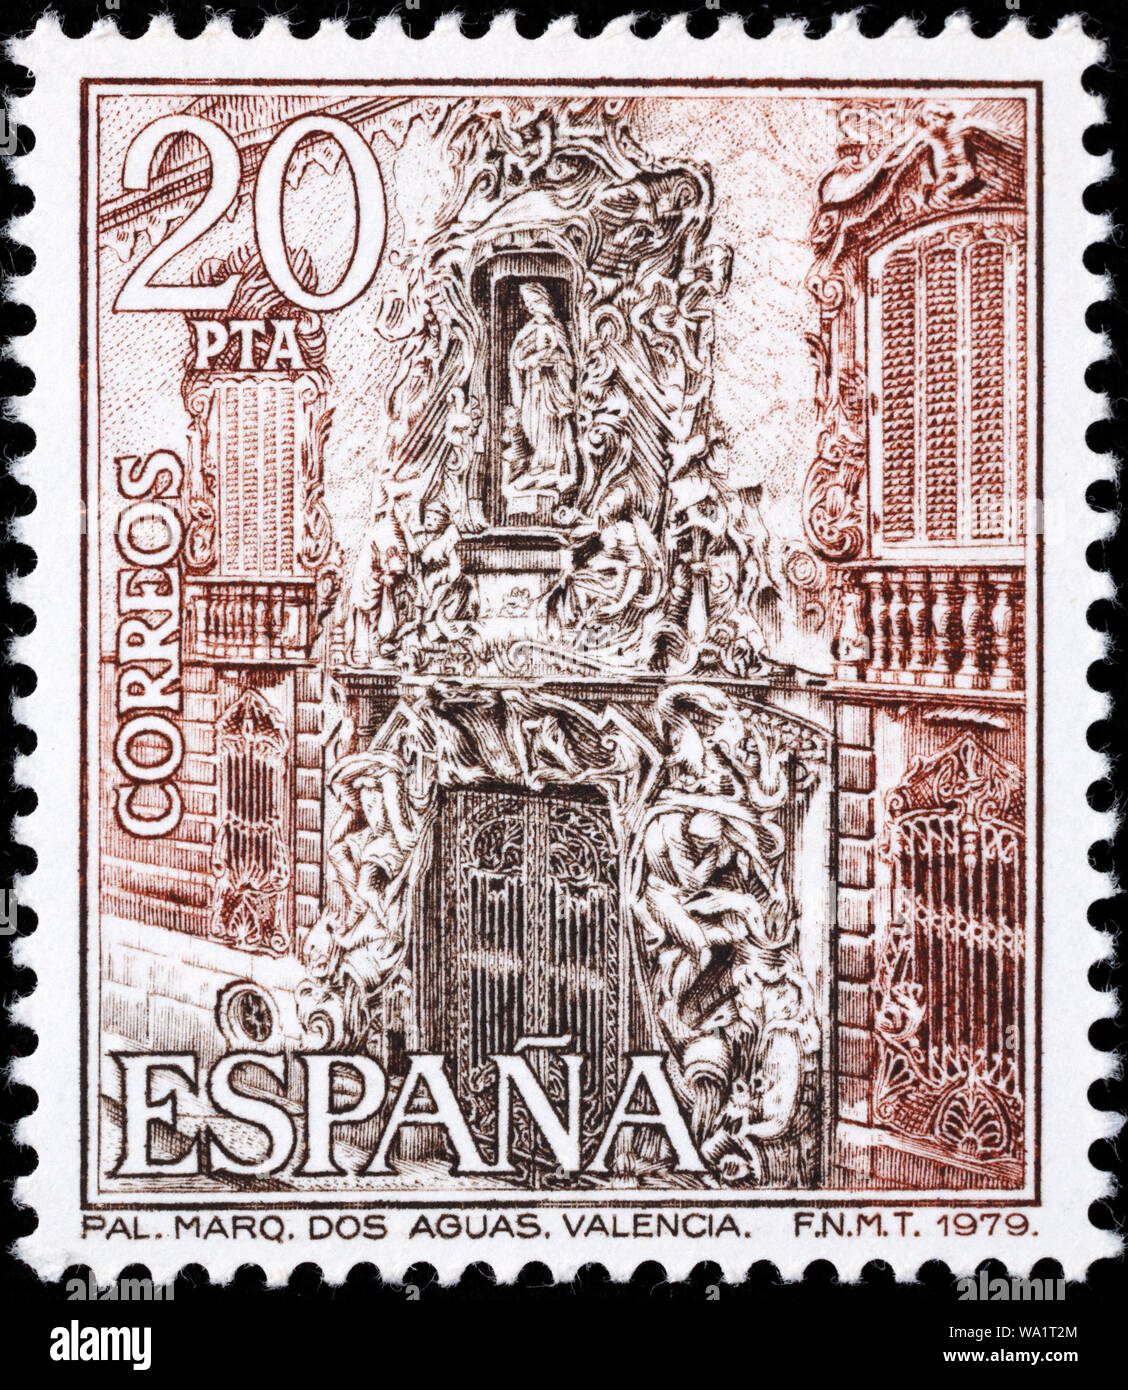 Palace of the Marques de Dos Aguas, Valencia, postage stamp, Spain, 1979 Stock Photo